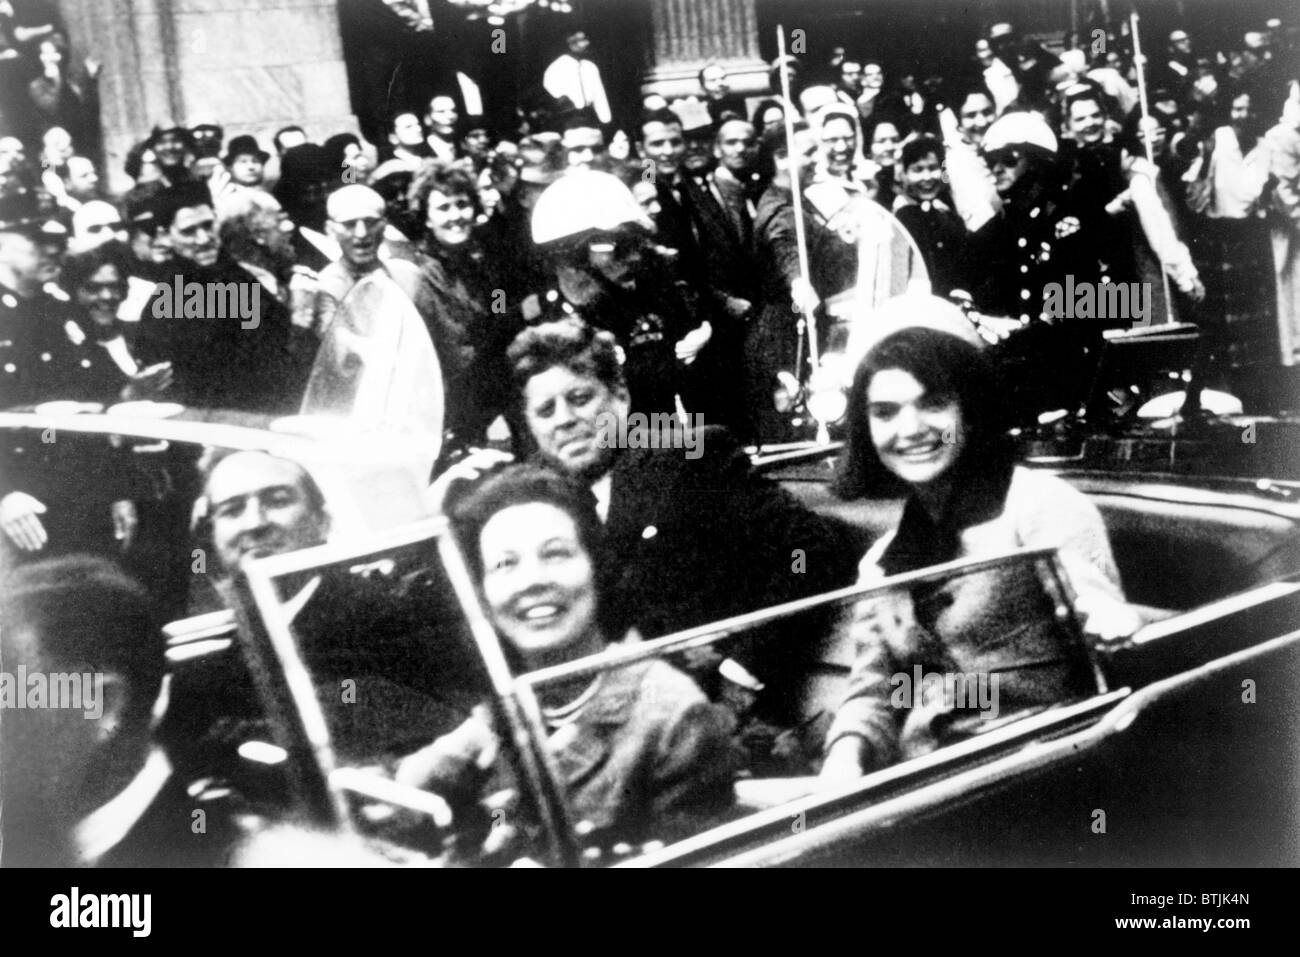 John F. Kennedy motorcade, Dallas, Texas. Photograph shows a close-up view of President and Mrs. Kennedy and Texas Governor John Connally and his wife. Victor Hugo King, photographer. November 22, 1963 Stock Photo